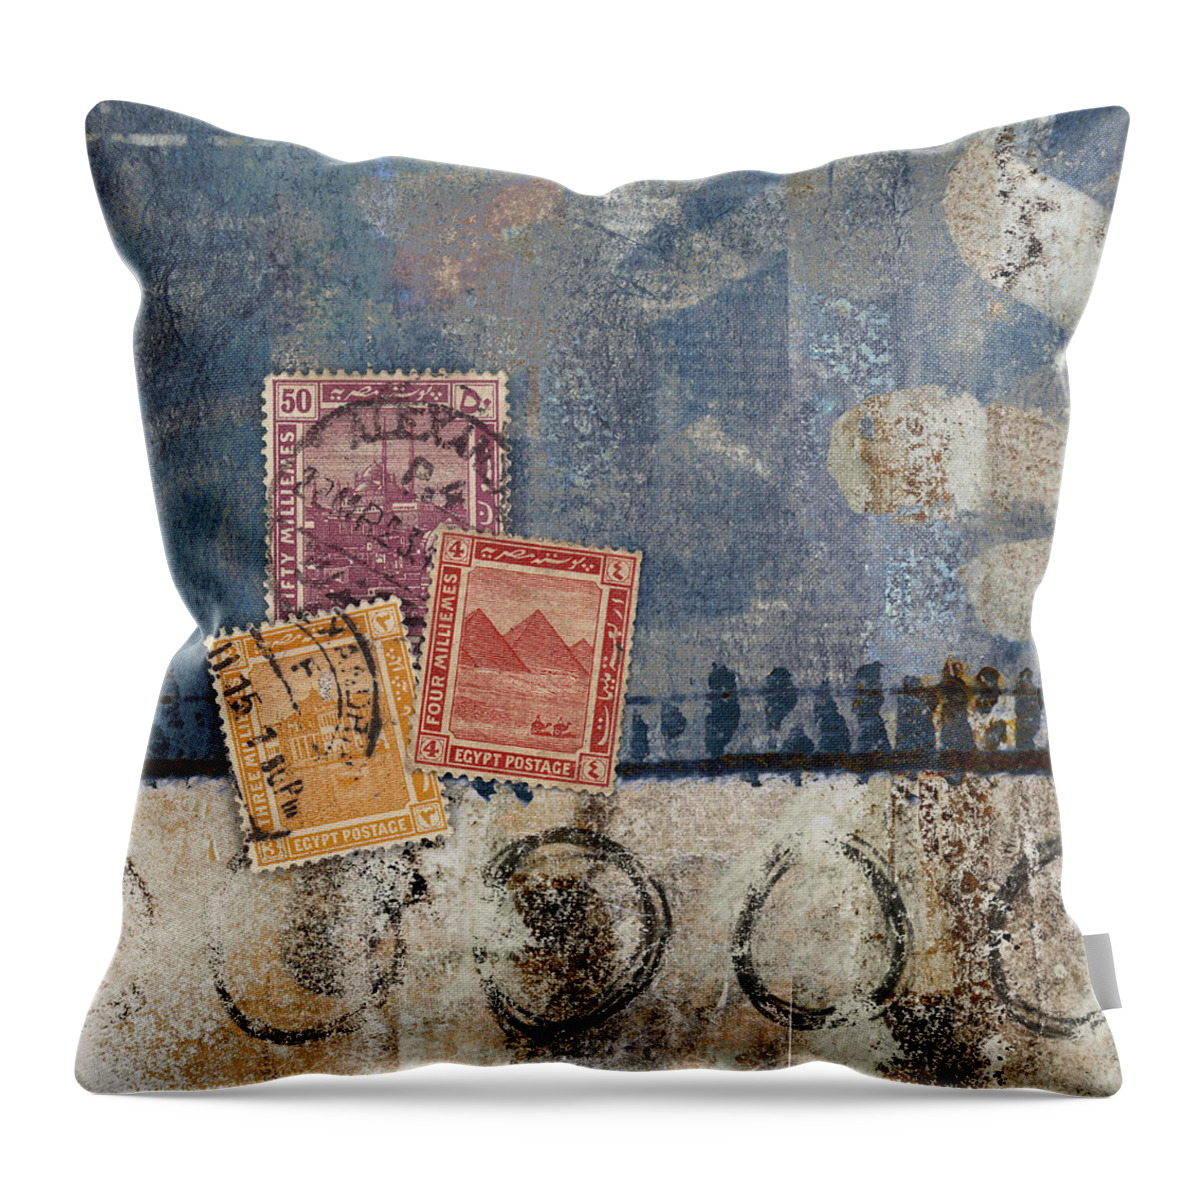 Egypt Throw Pillow featuring the photograph Egyptian Skies by Carol Leigh